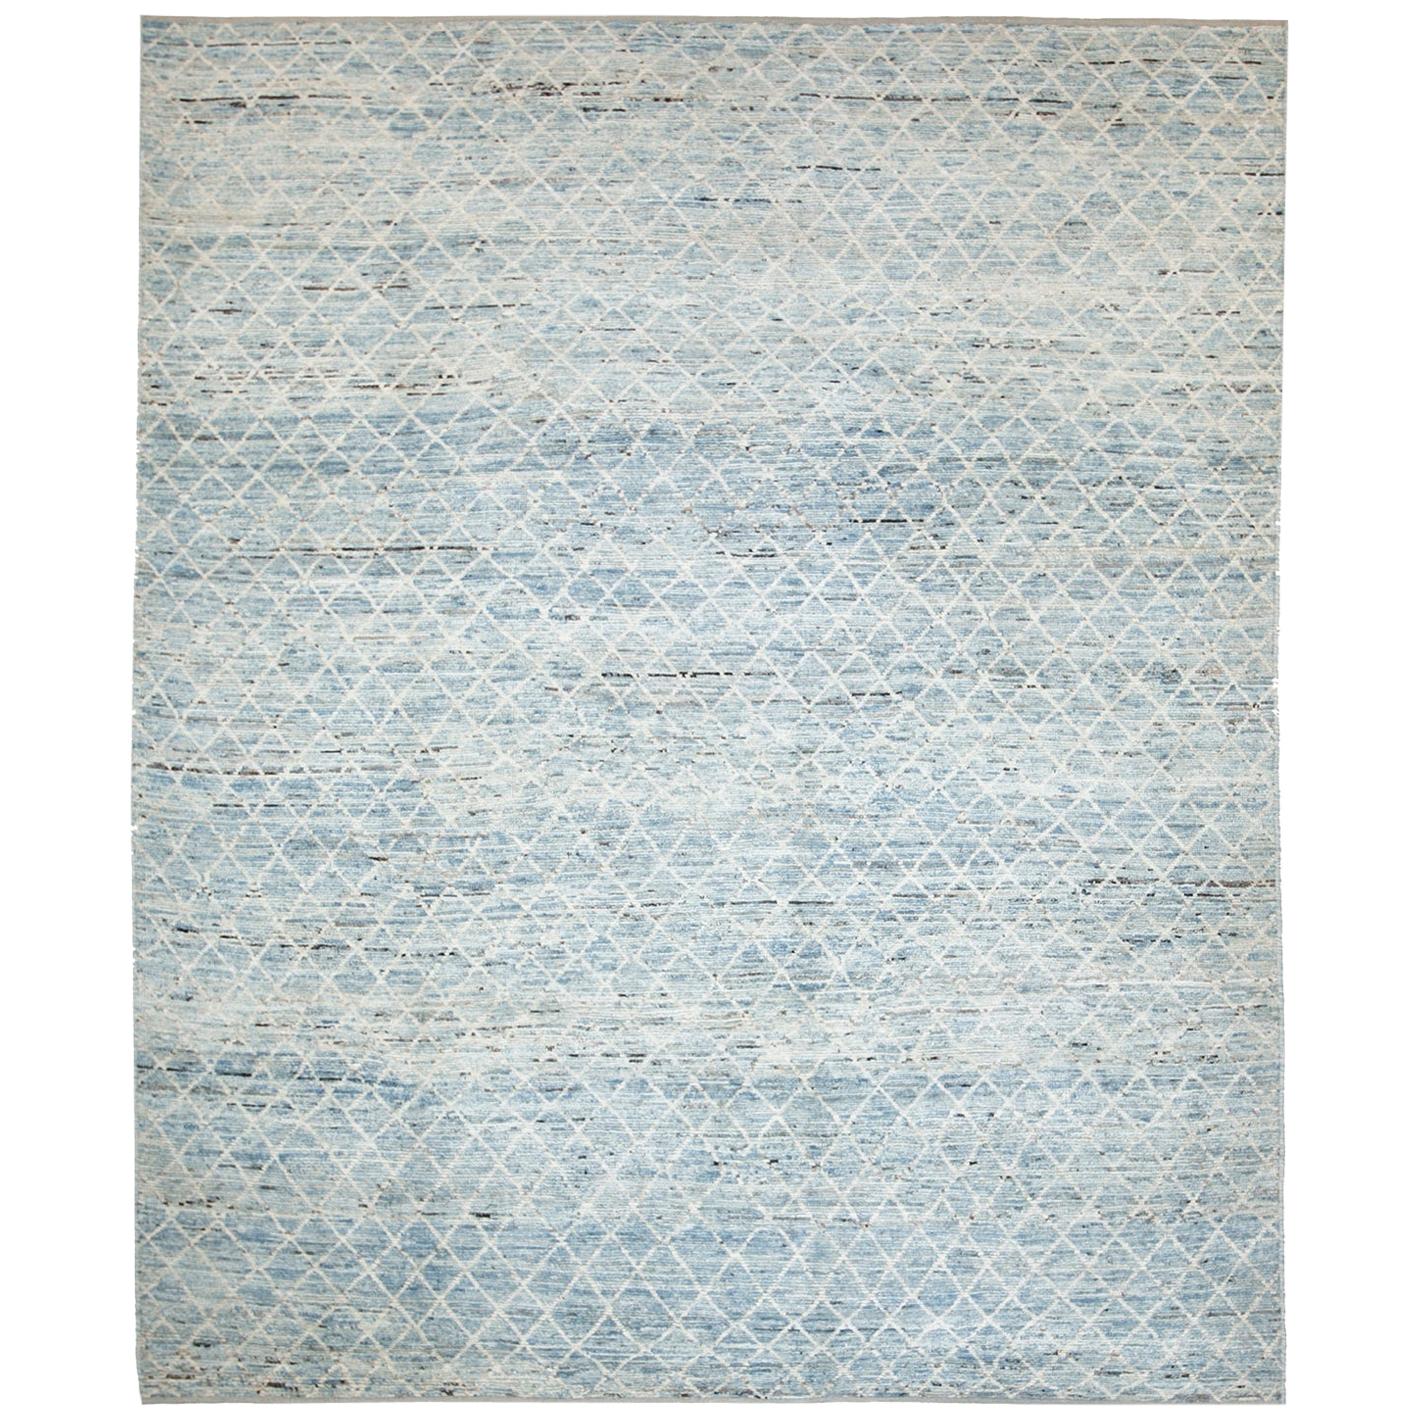 Light Blue Modern Moroccan Style Rug. Size: 8 ft 4 in x 10 ft